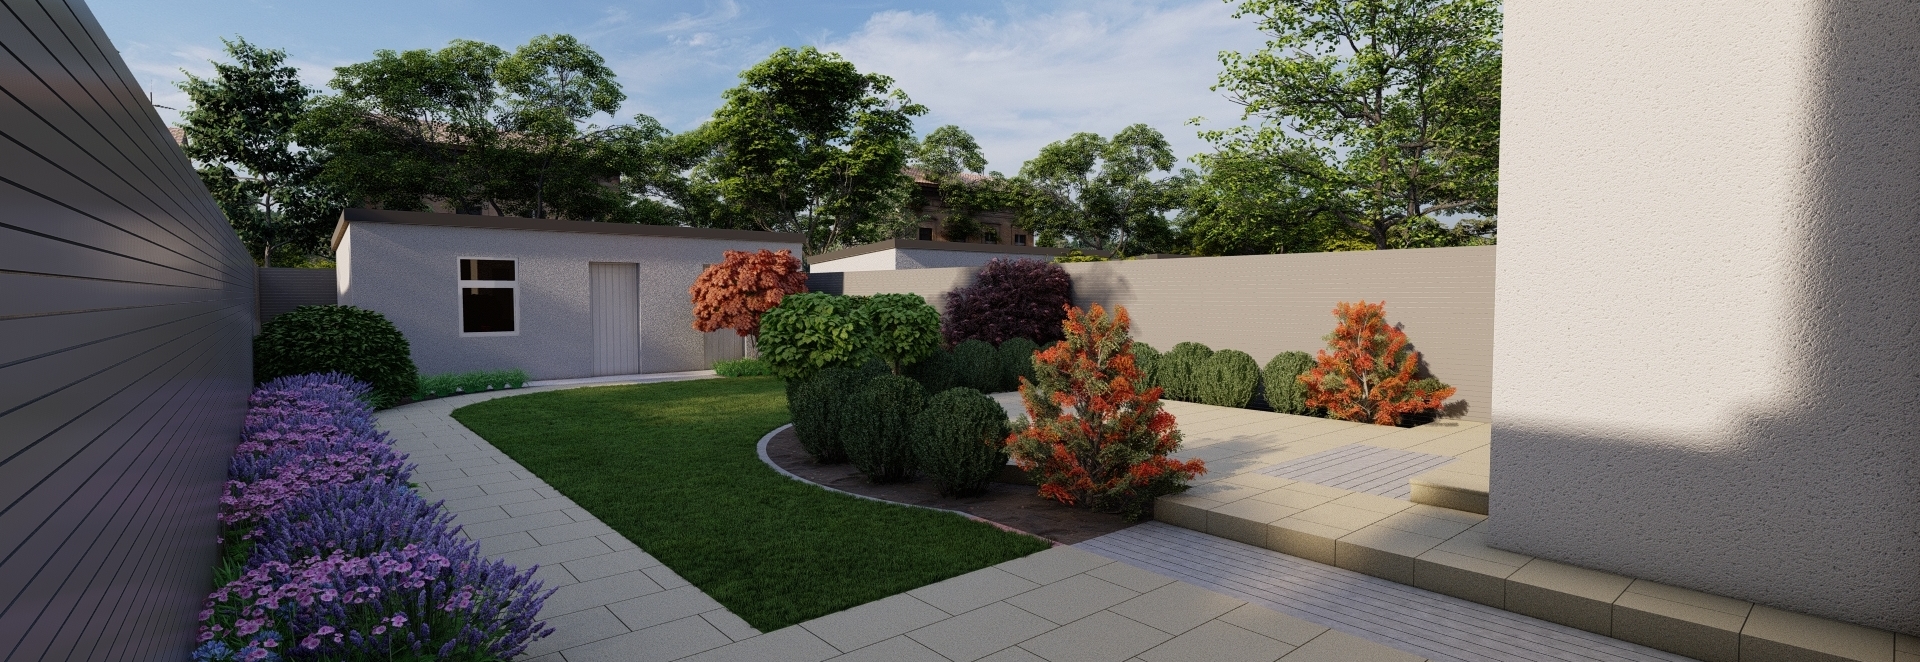 A Garden Design for a medium sized Family garden in Rathfarnham,  Dublin 14 features an expansive  Raised Patio with the emphasis on the provision of space for separate formal & casual dining areas with generously planted borders, custom made timber slatted fencing, Limestone paving, and large lawn area |   Owen Chubb Garden Design, Tel 087-2306 128